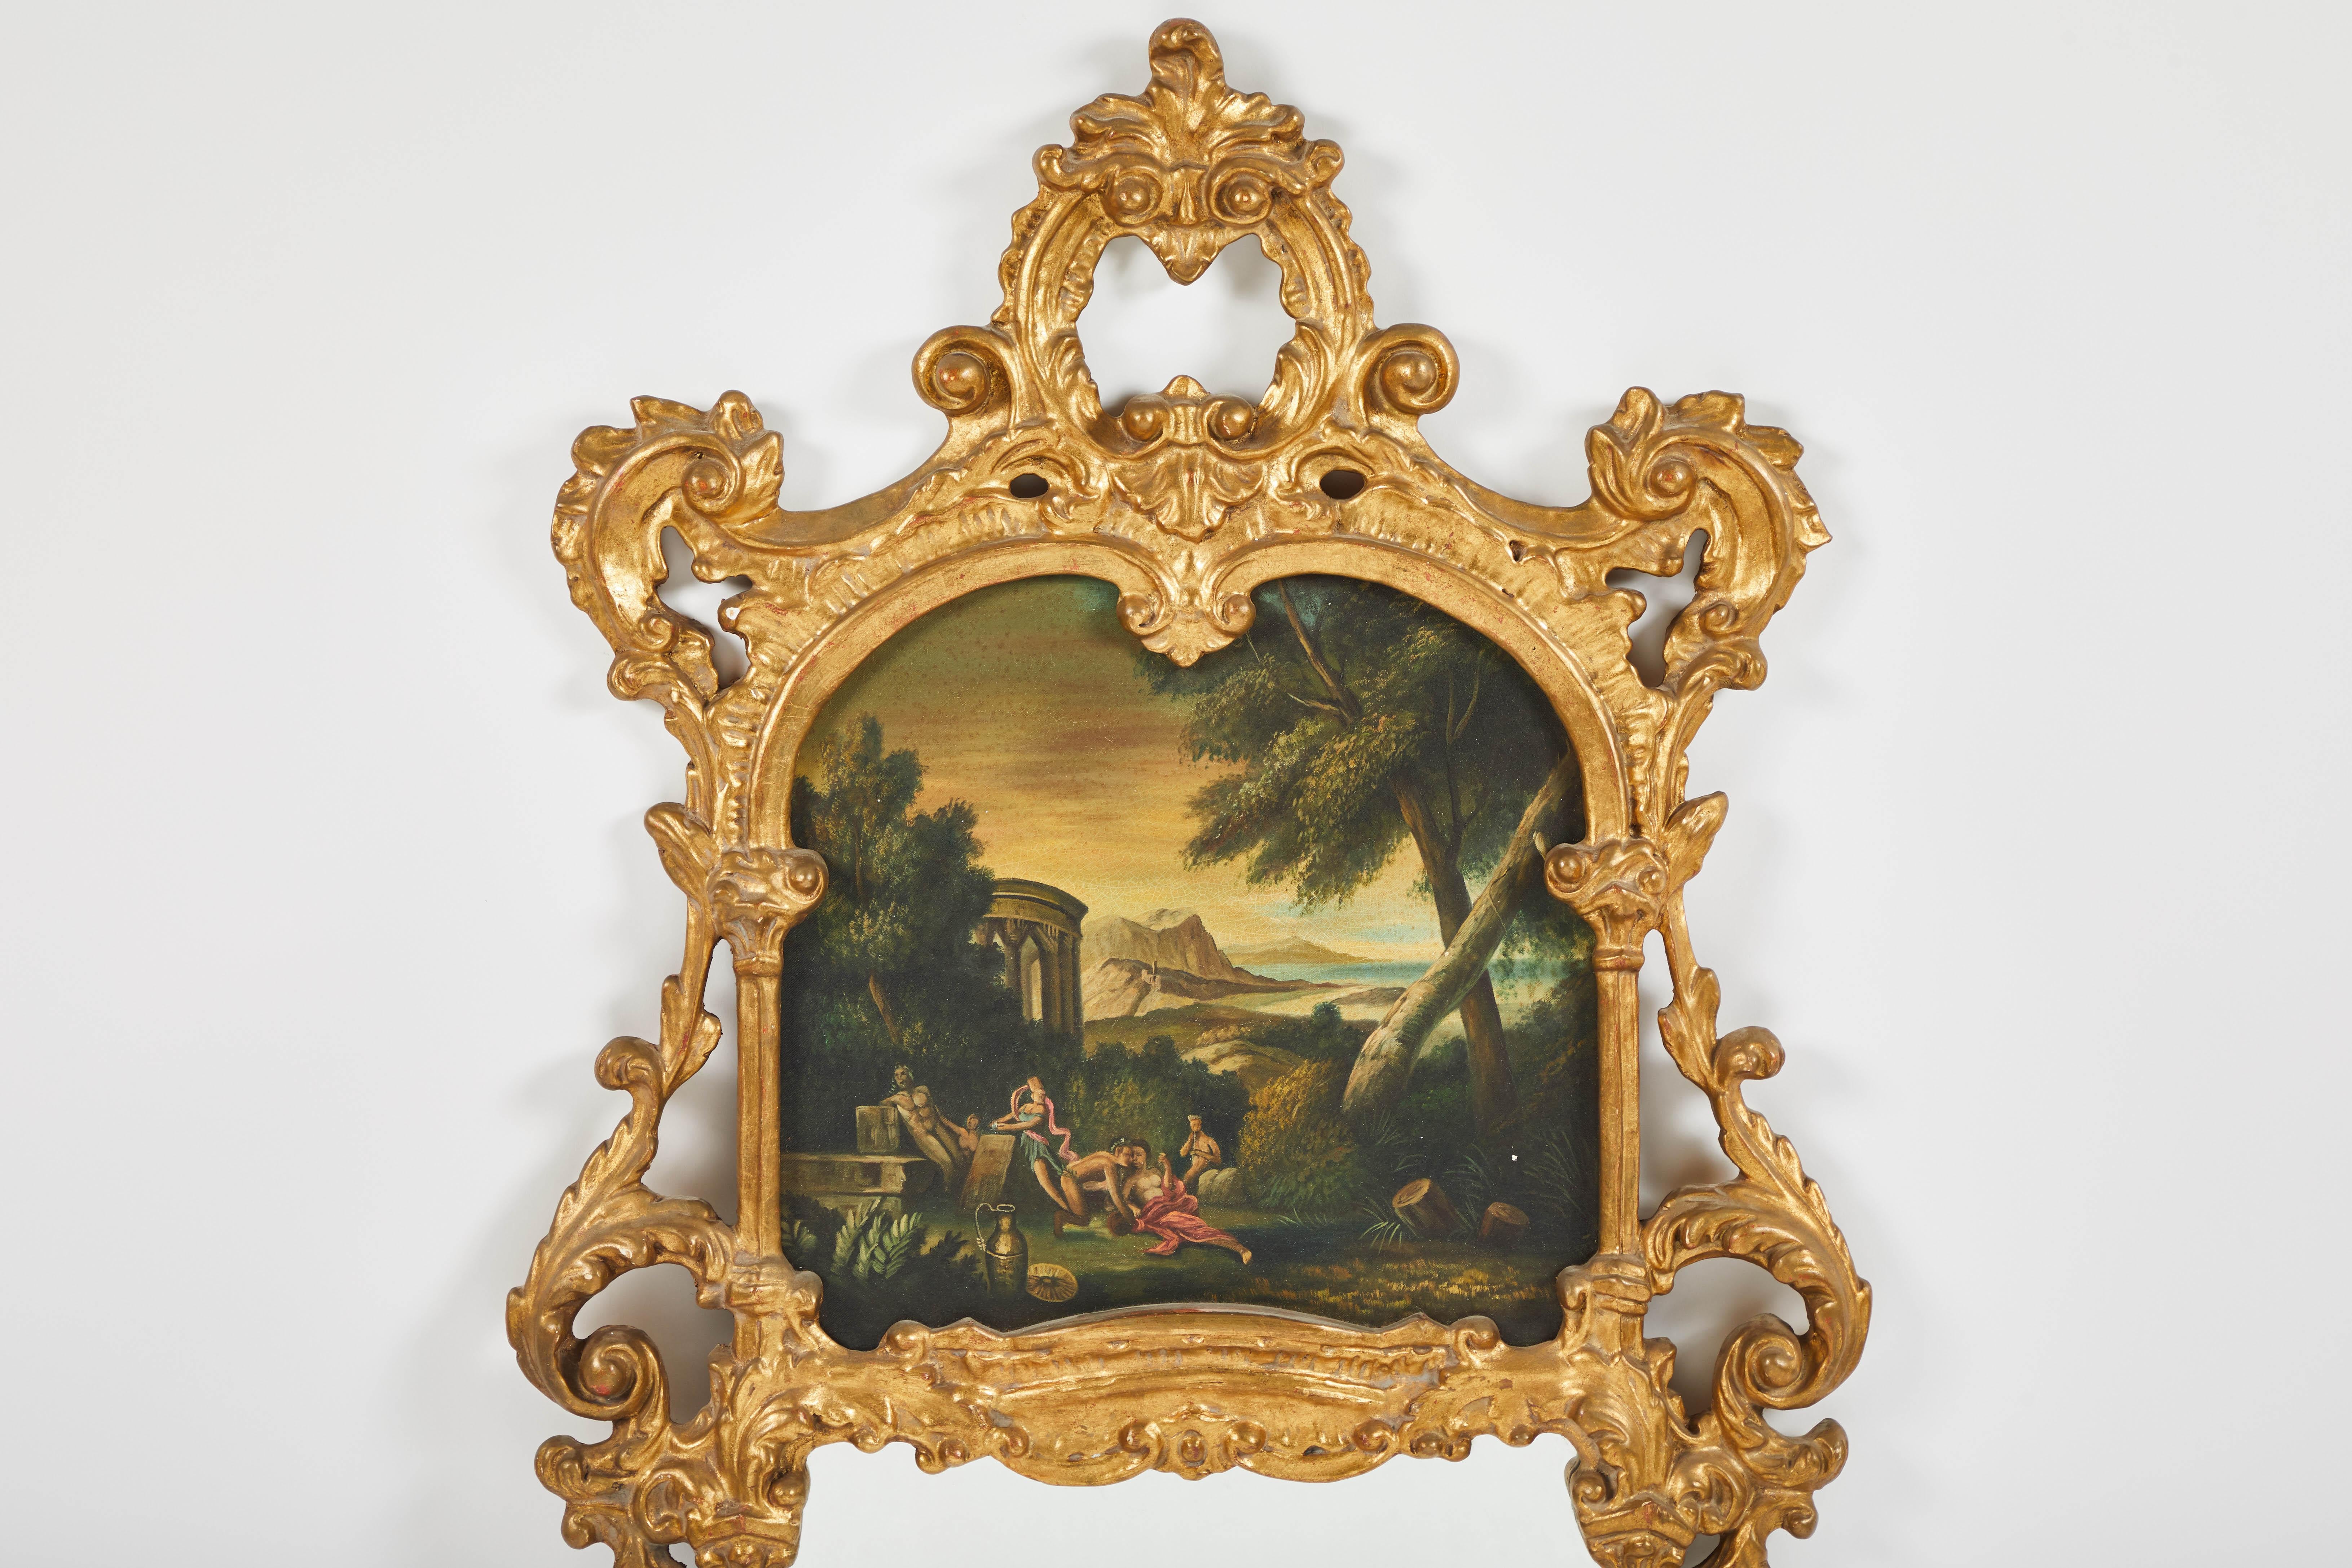 An Italian Baroque mirror style carved giltwood trumeau mirror. The painting depicts a lunching party in a forest with ruins in the background, 19th century.


